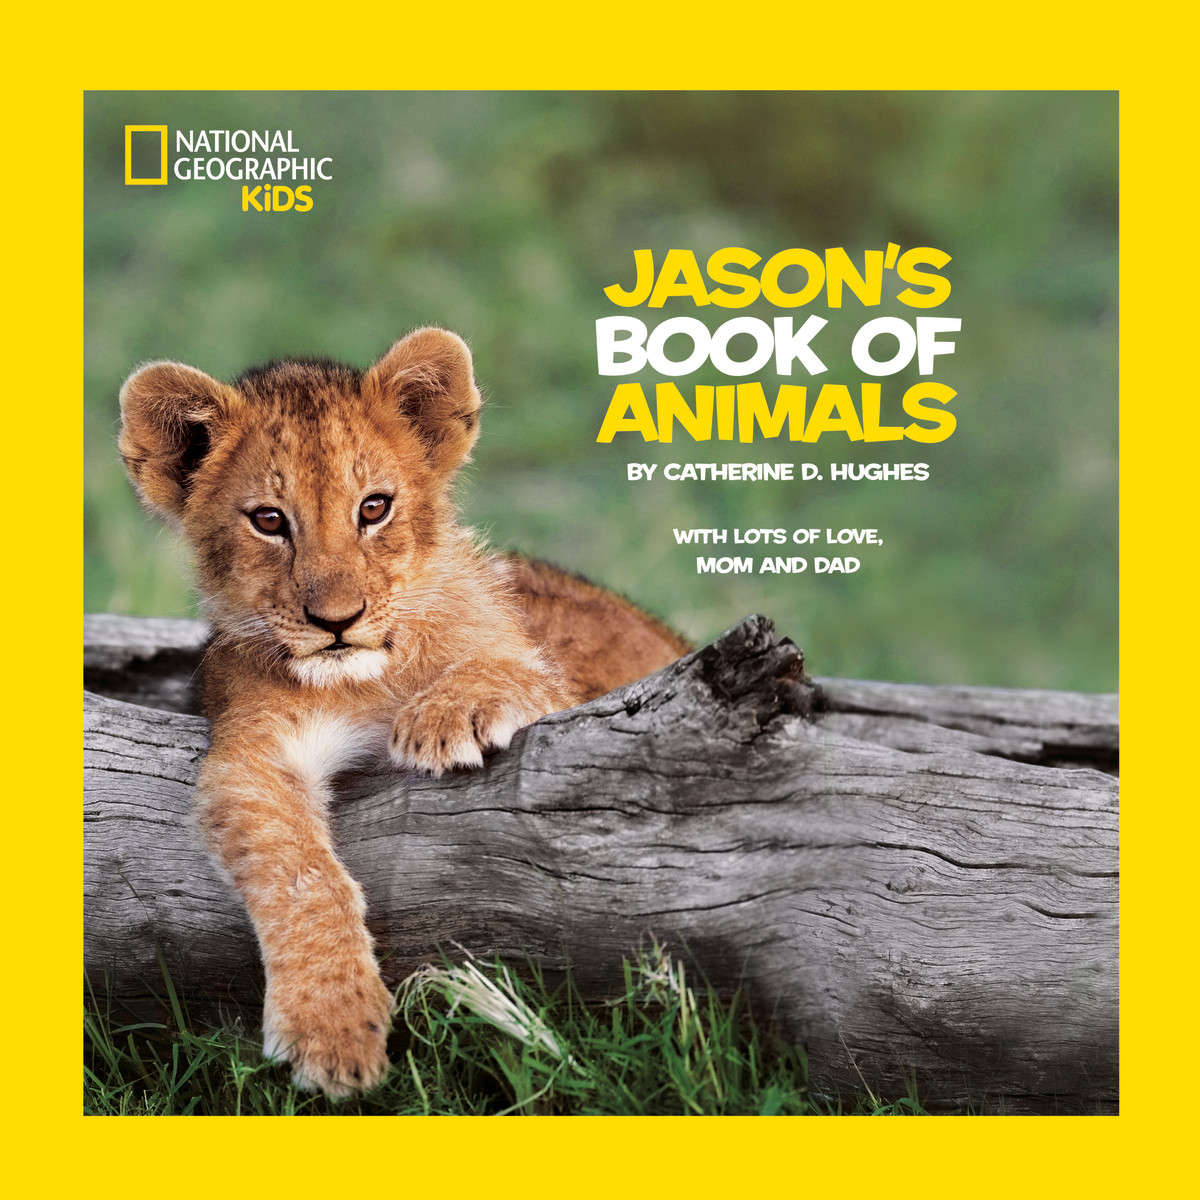 Put Your Kids in the Story with National Geographic Kids Books